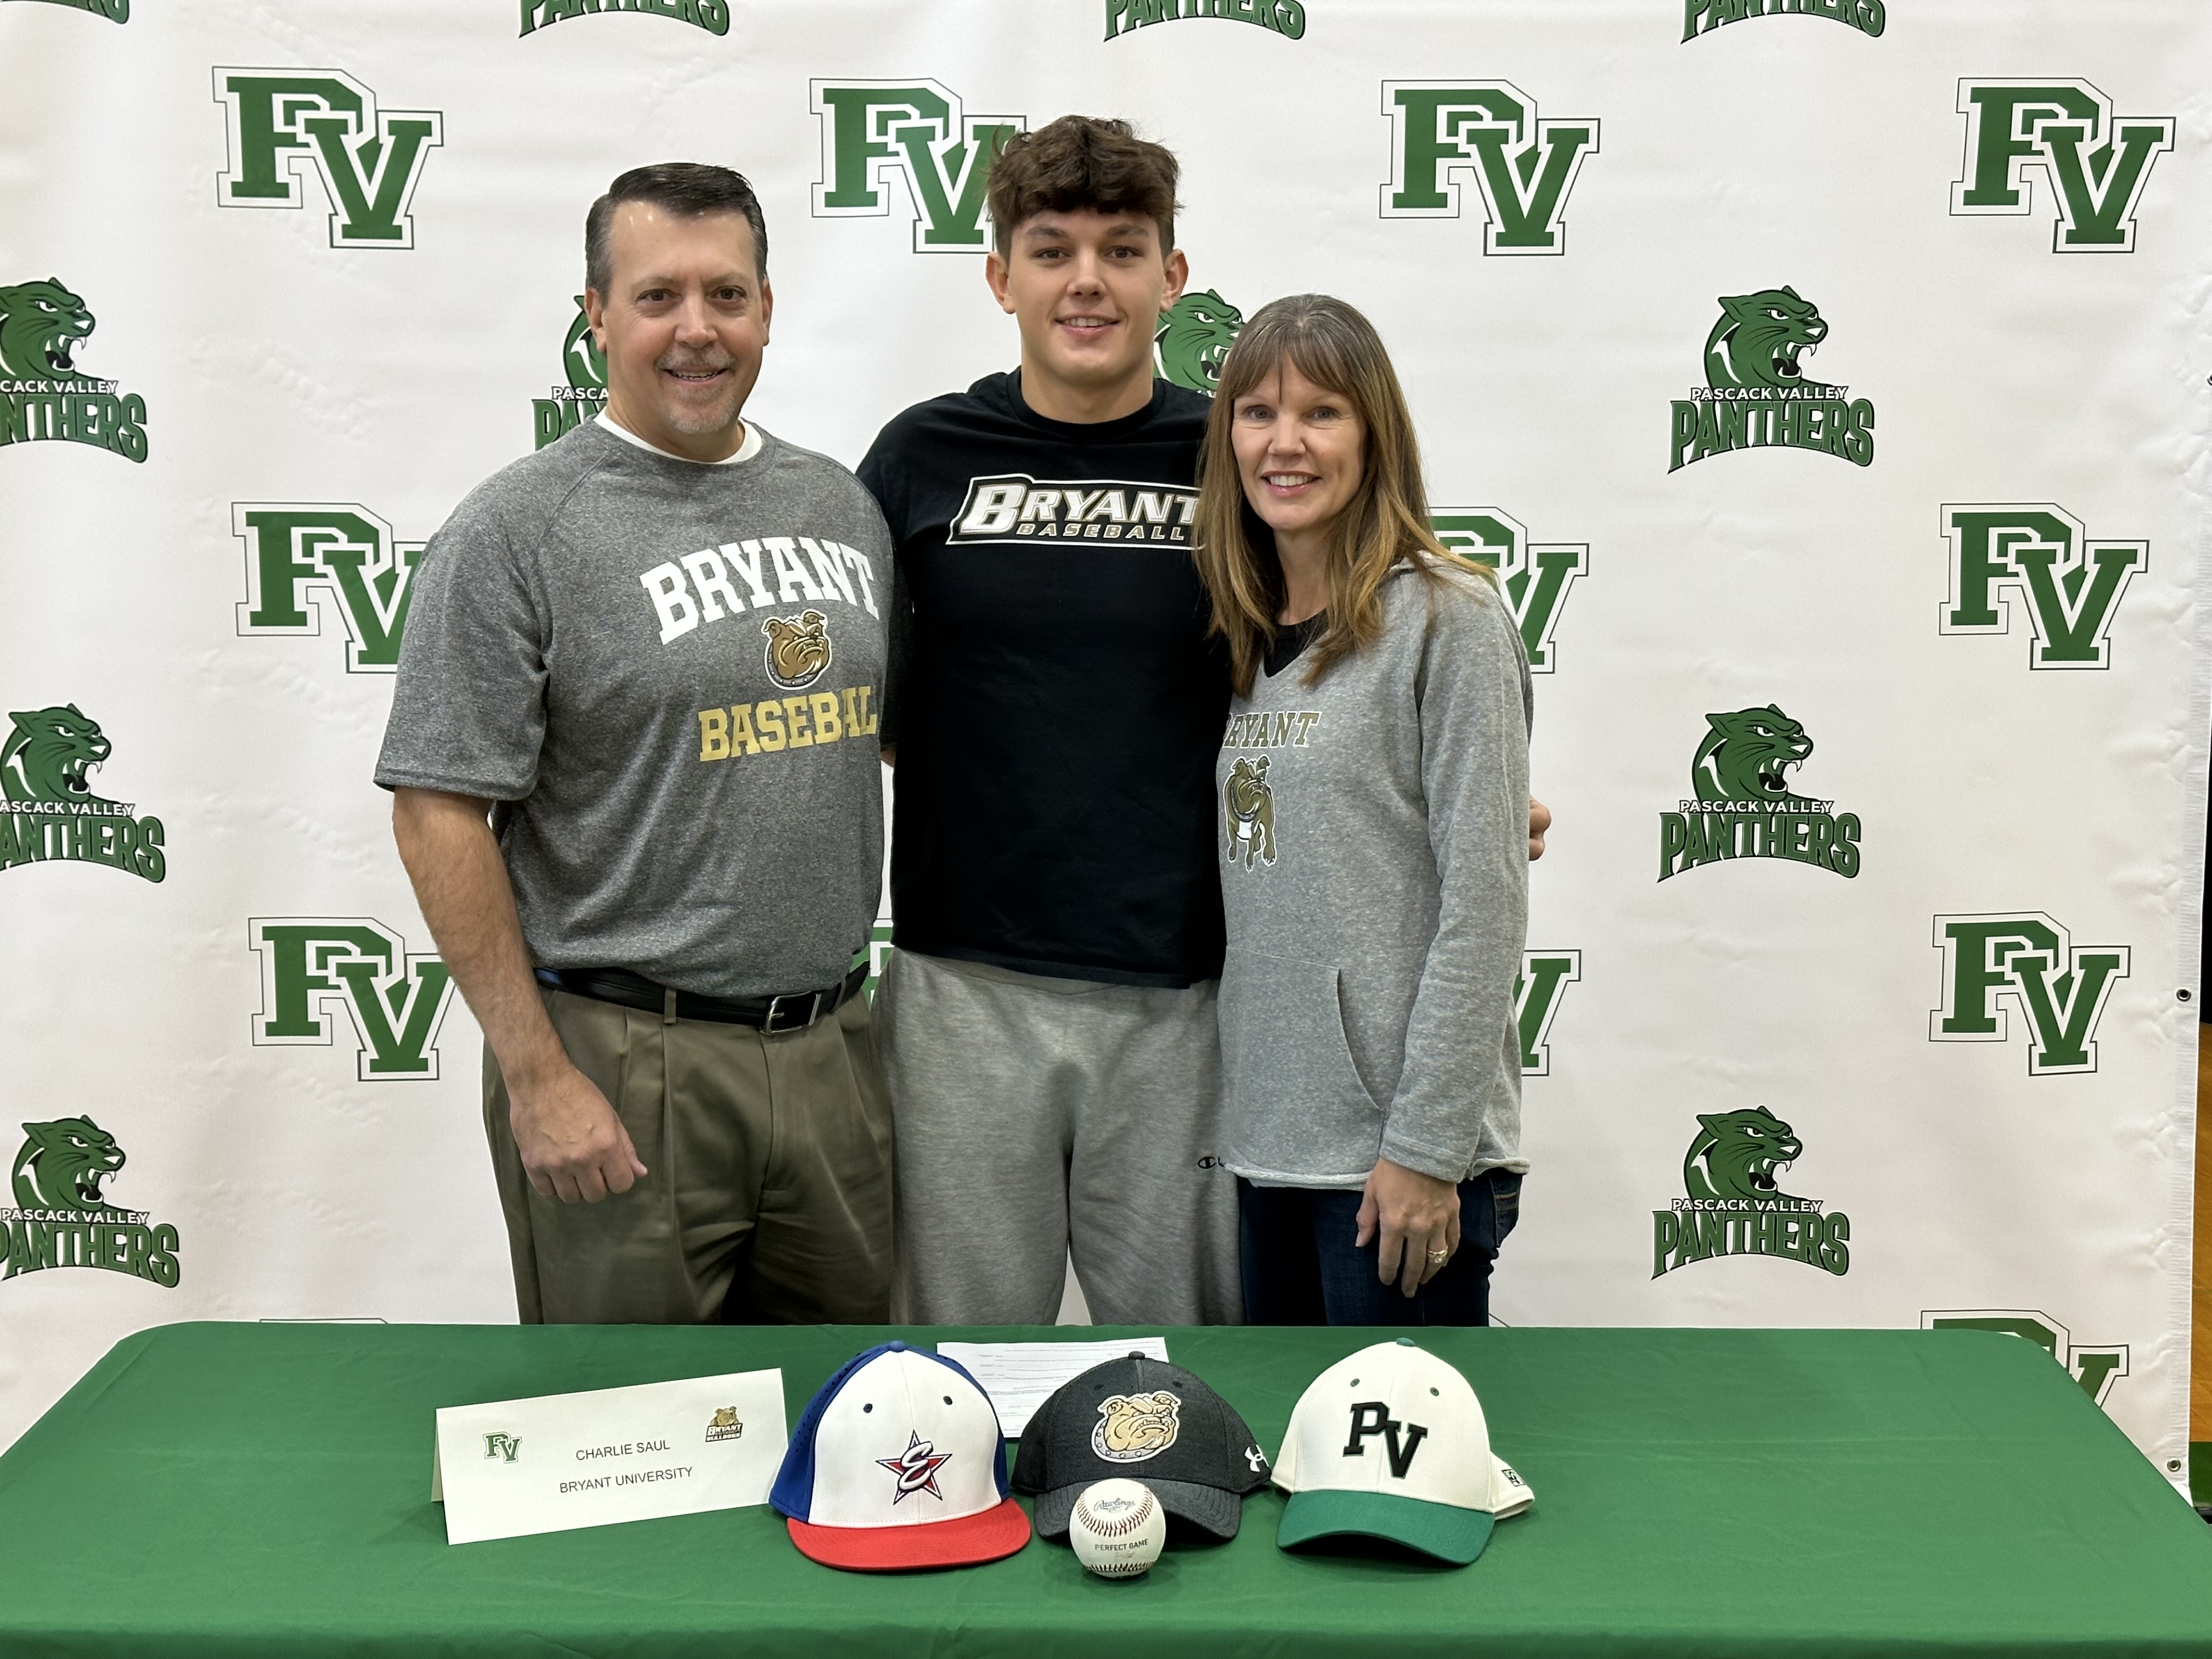 Pascack Valley's Charlie Saul signs with Bryant baseball alongside his parents, Andrea Wolff and Kevin Saul